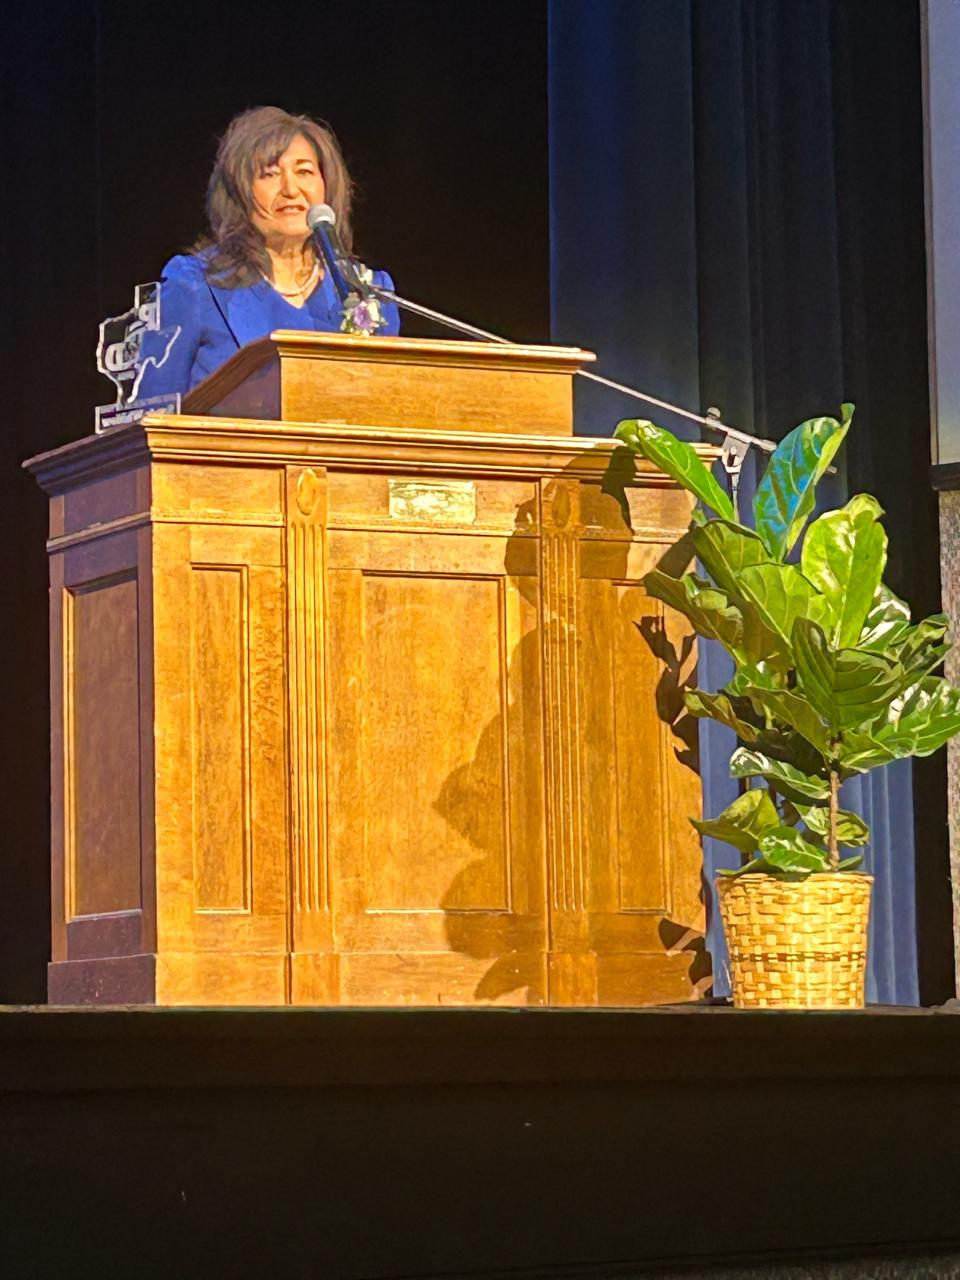 Honoree Sandra Whitlow speaks at the Palo Duro High School Don Hall of Fame induction event held Thursday.